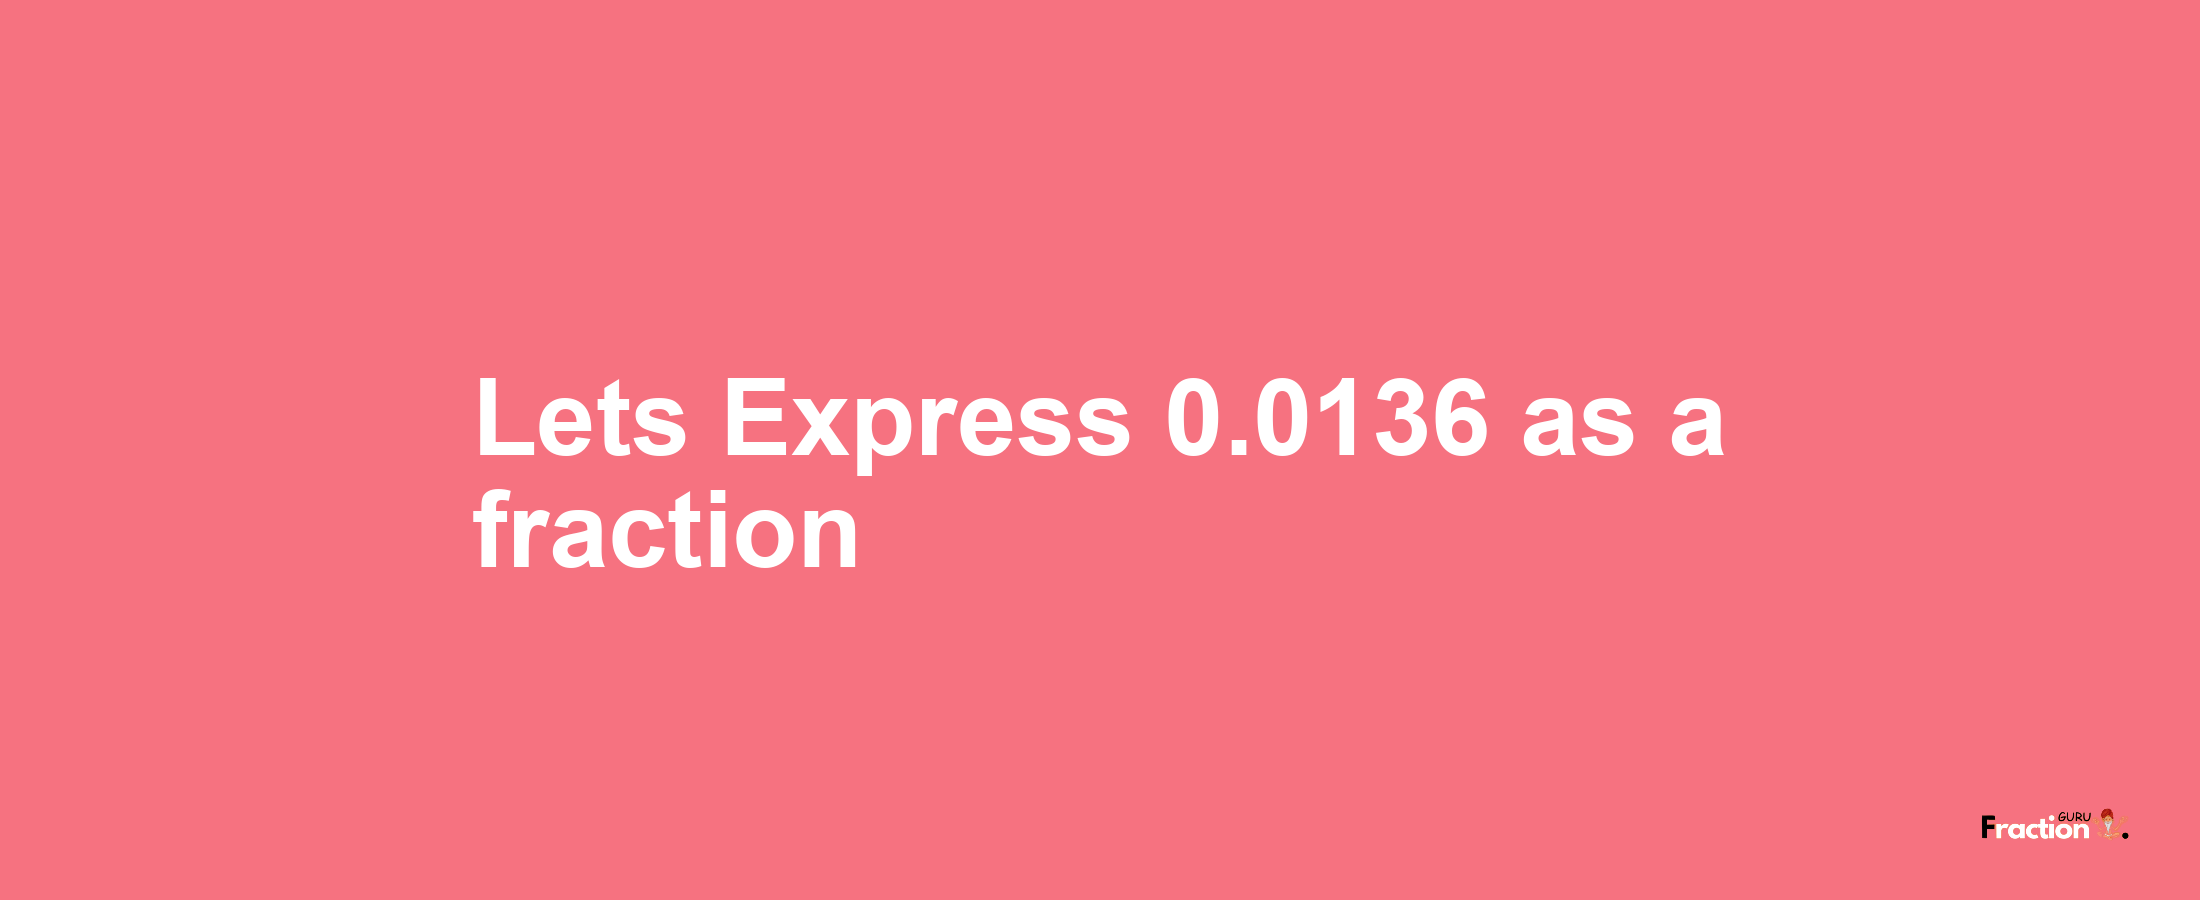 Lets Express 0.0136 as afraction